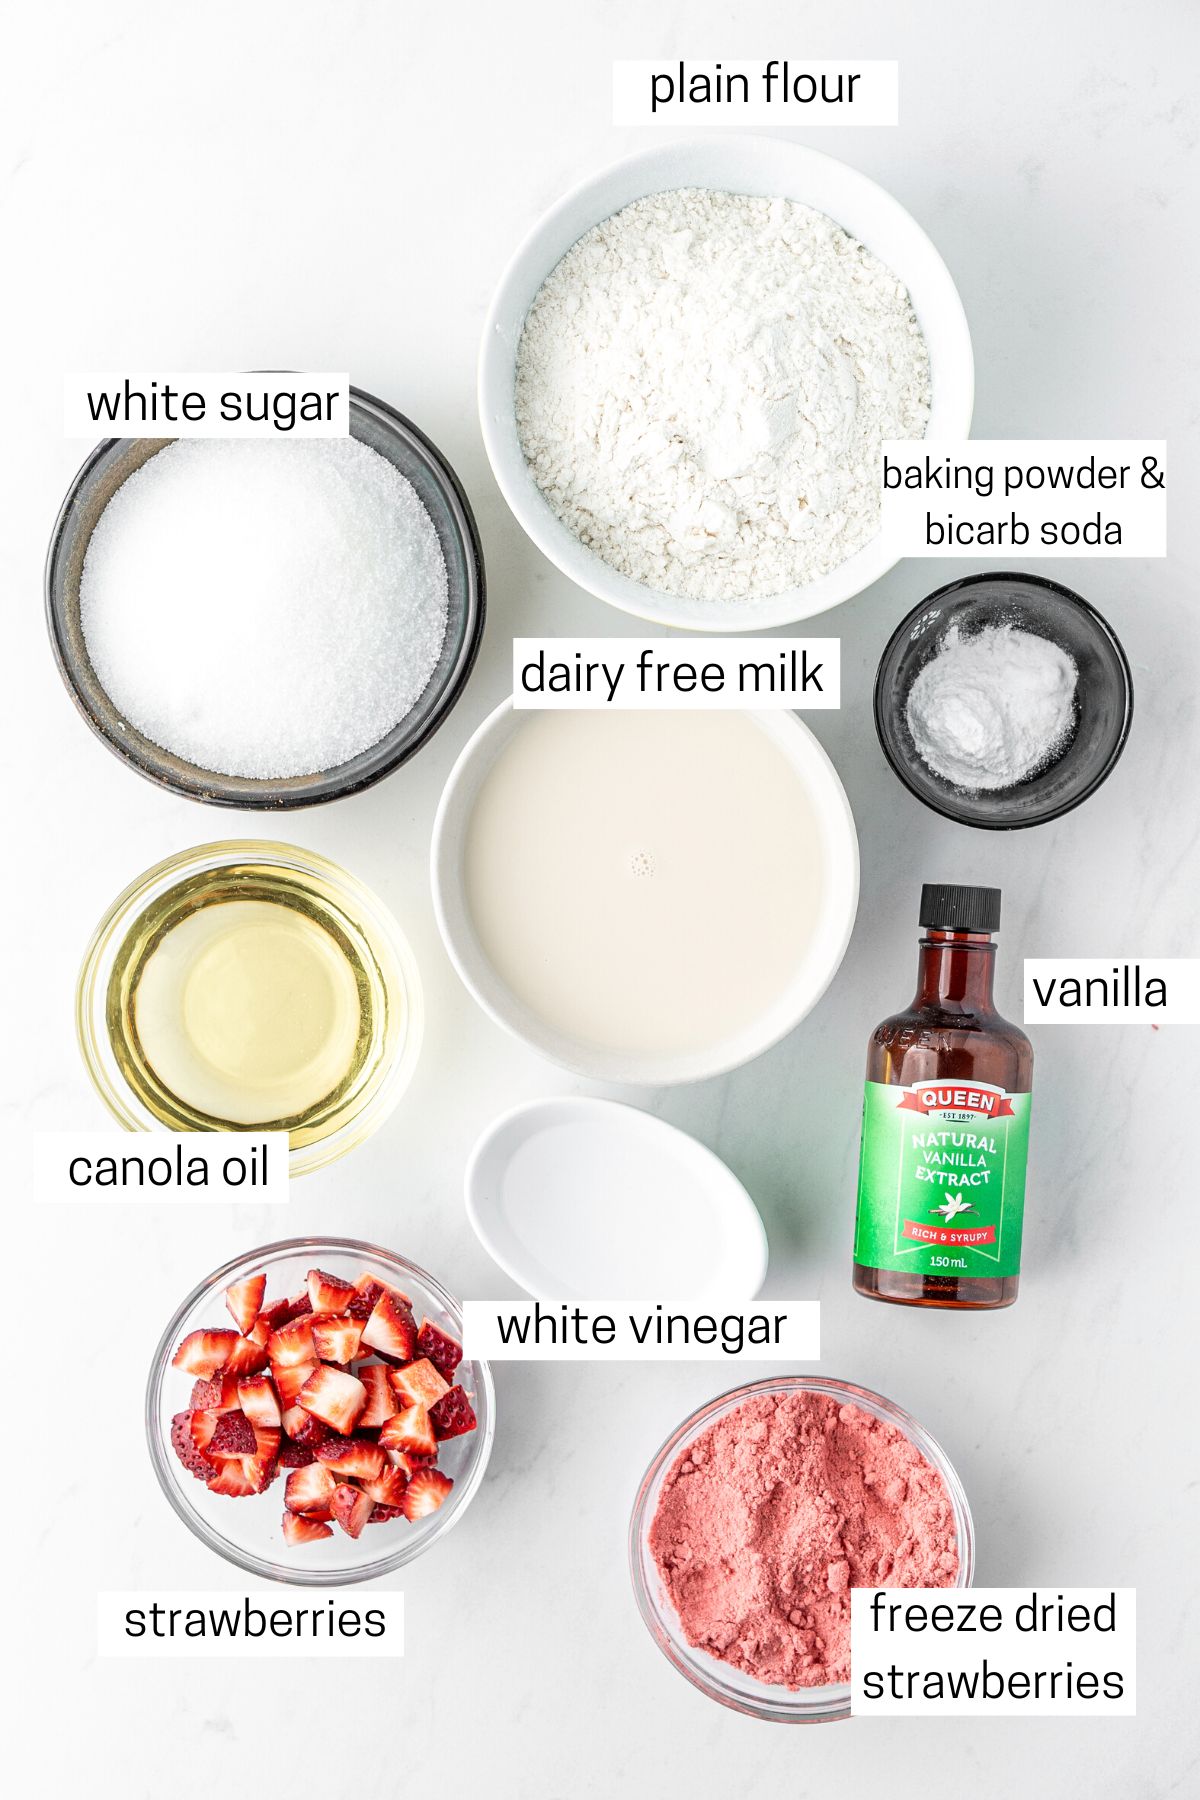 All ingredients needed to make strawberry cupcakes laid out in small bowls.